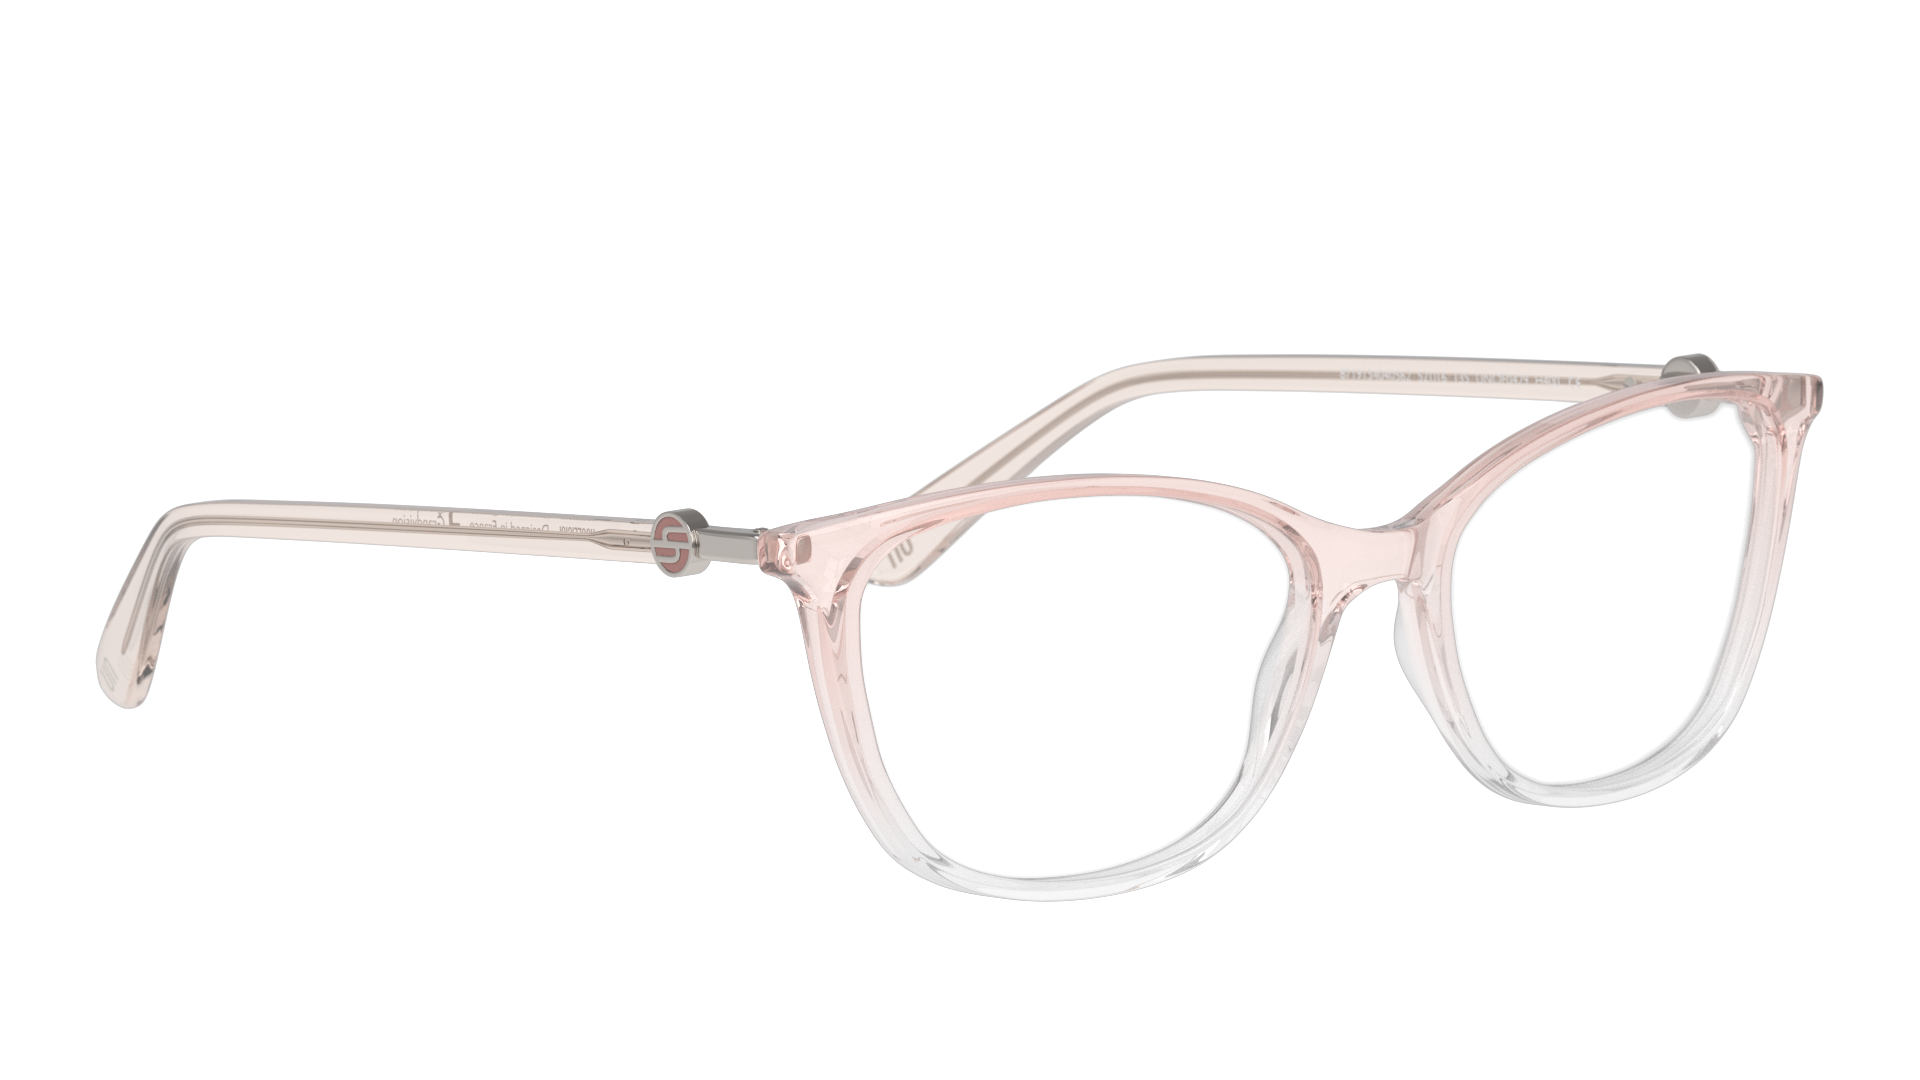 Angle_Right01 Unofficial UNOF0429 (PX00) Glasses Transparent / Pink